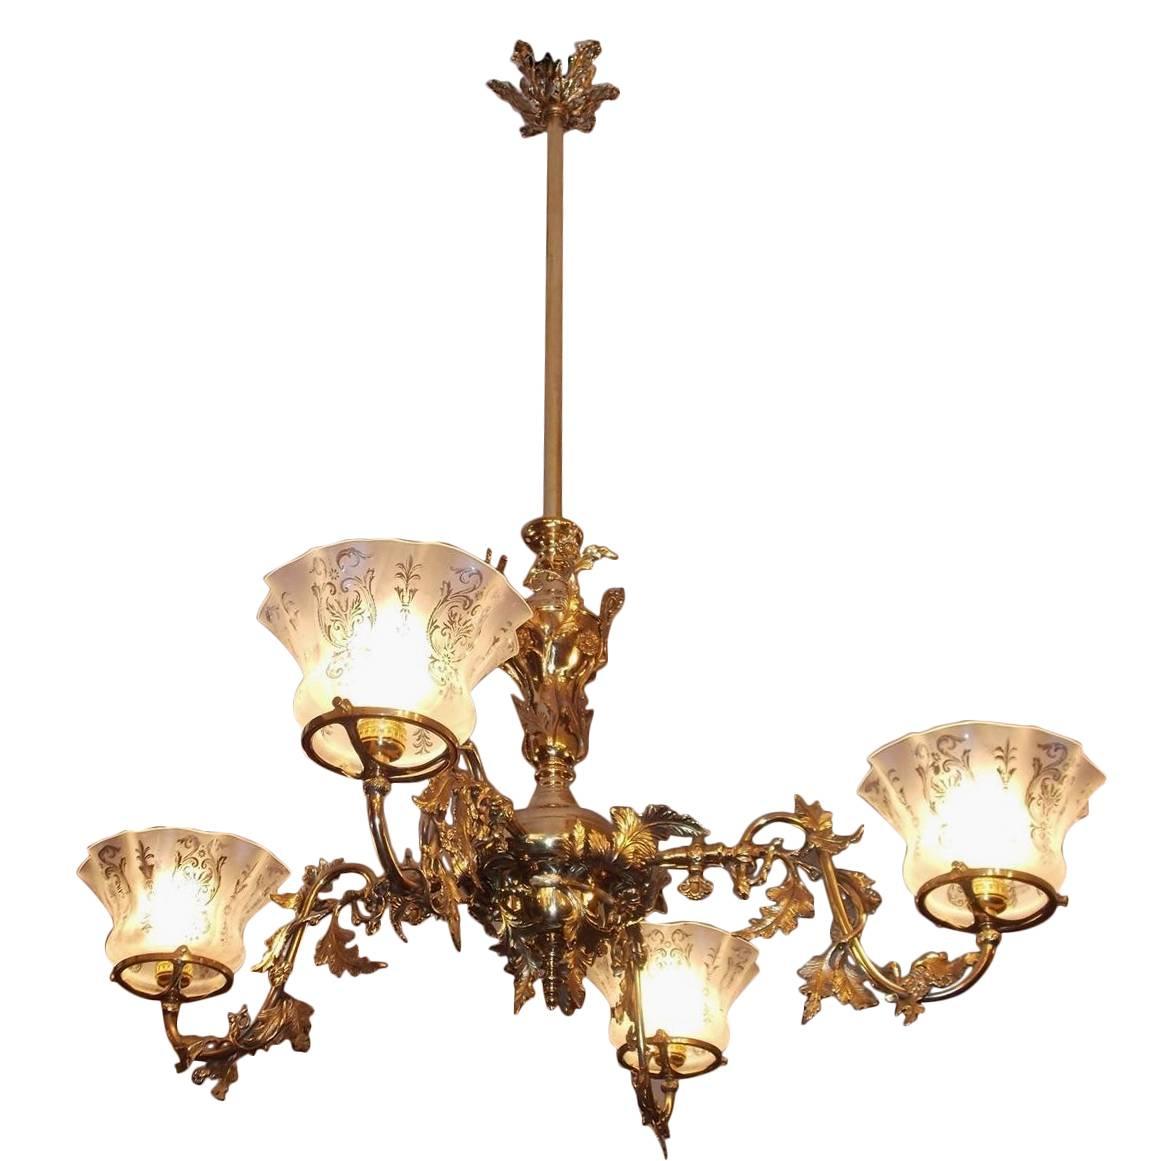 American Brass Floral Gasolier with Original Frosted Globes, Circa 1860